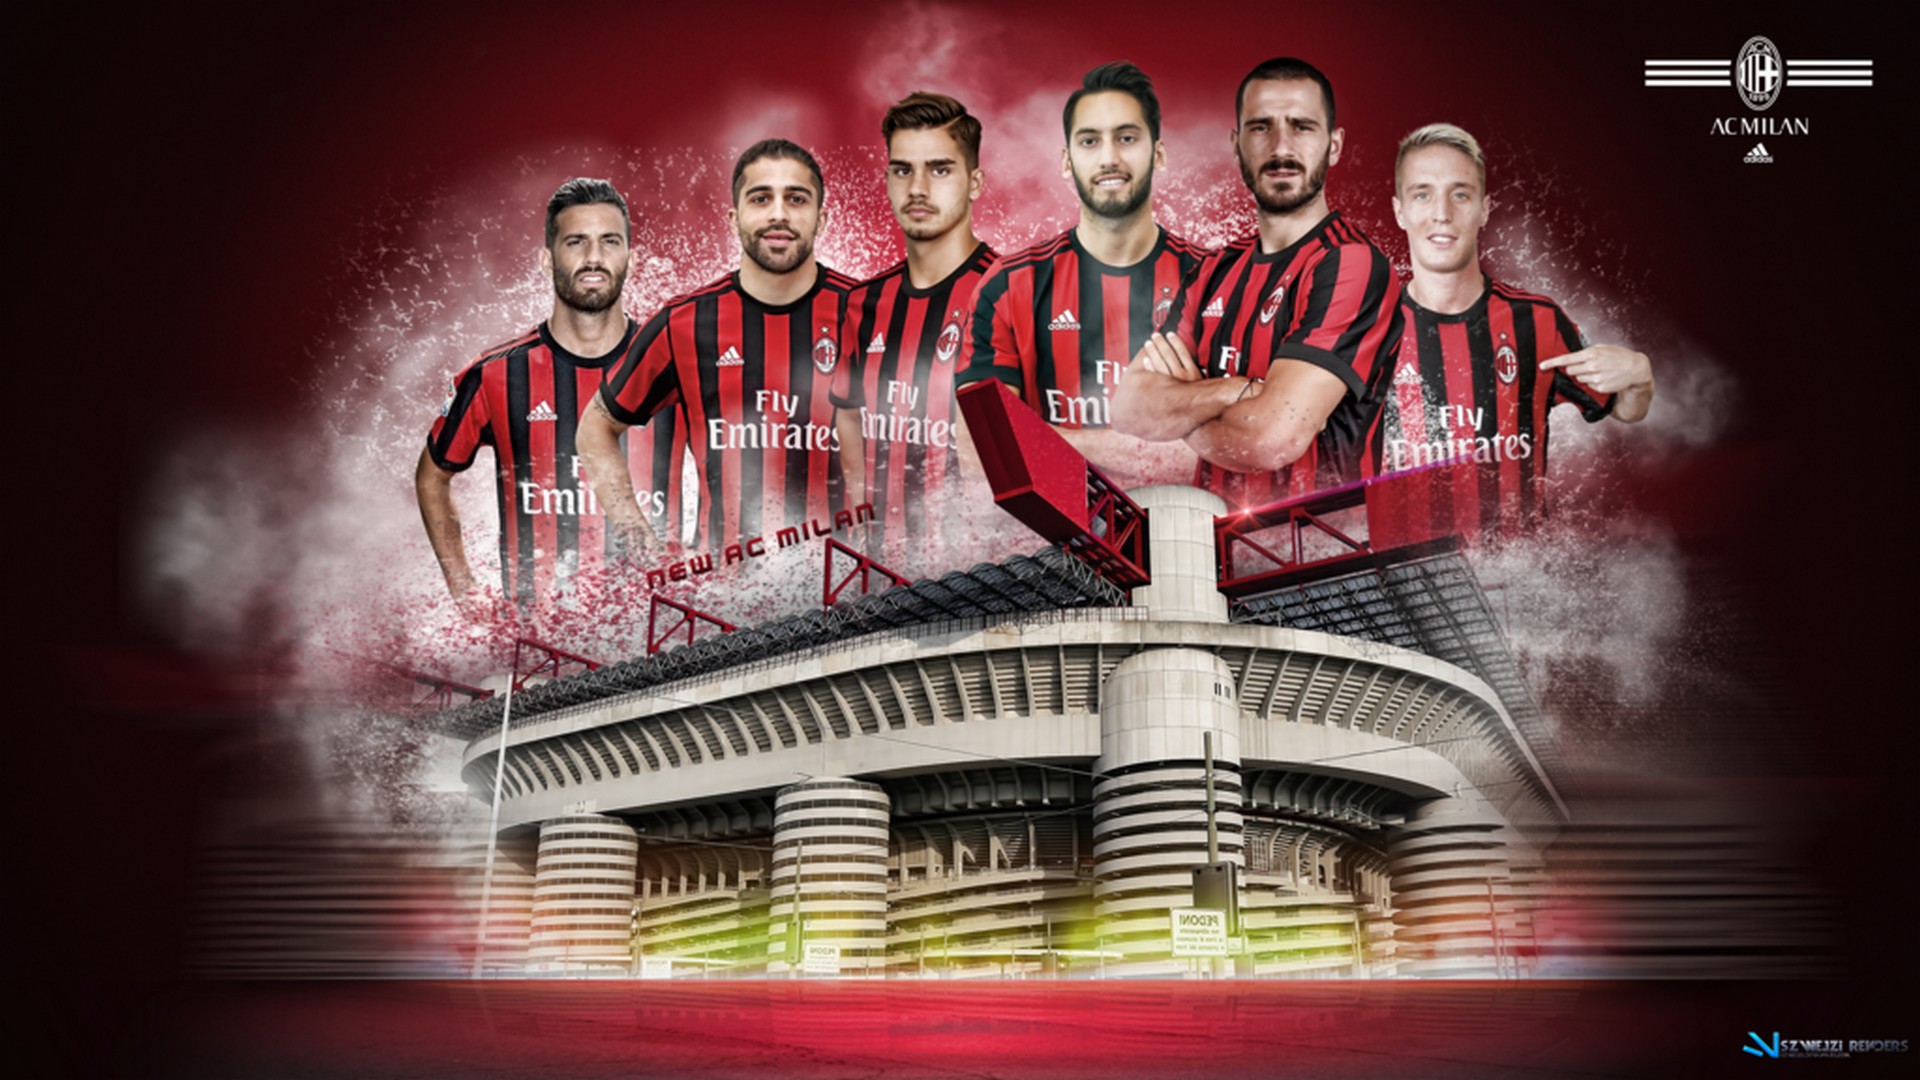 Milan Wallpaper HD With high-resolution 1920X1080 pixel. You can use this wallpaper for your Desktop Computers, Mac Screensavers, Windows Backgrounds, iPhone Wallpapers, Tablet or Android Lock screen and another Mobile device